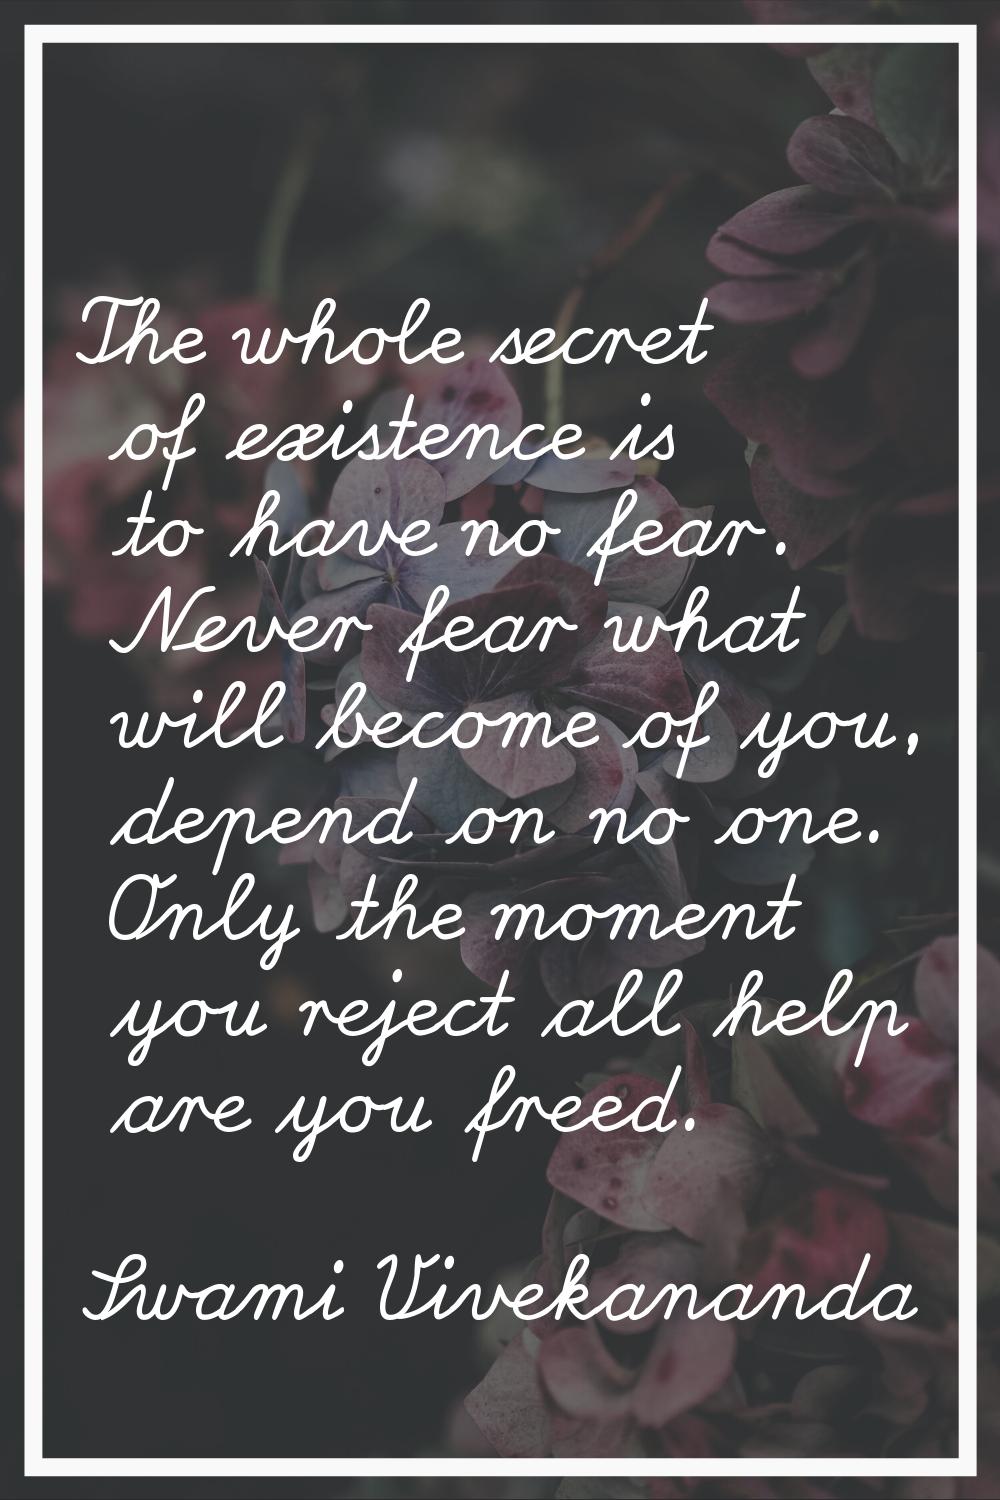 The whole secret of existence is to have no fear. Never fear what will become of you, depend on no 